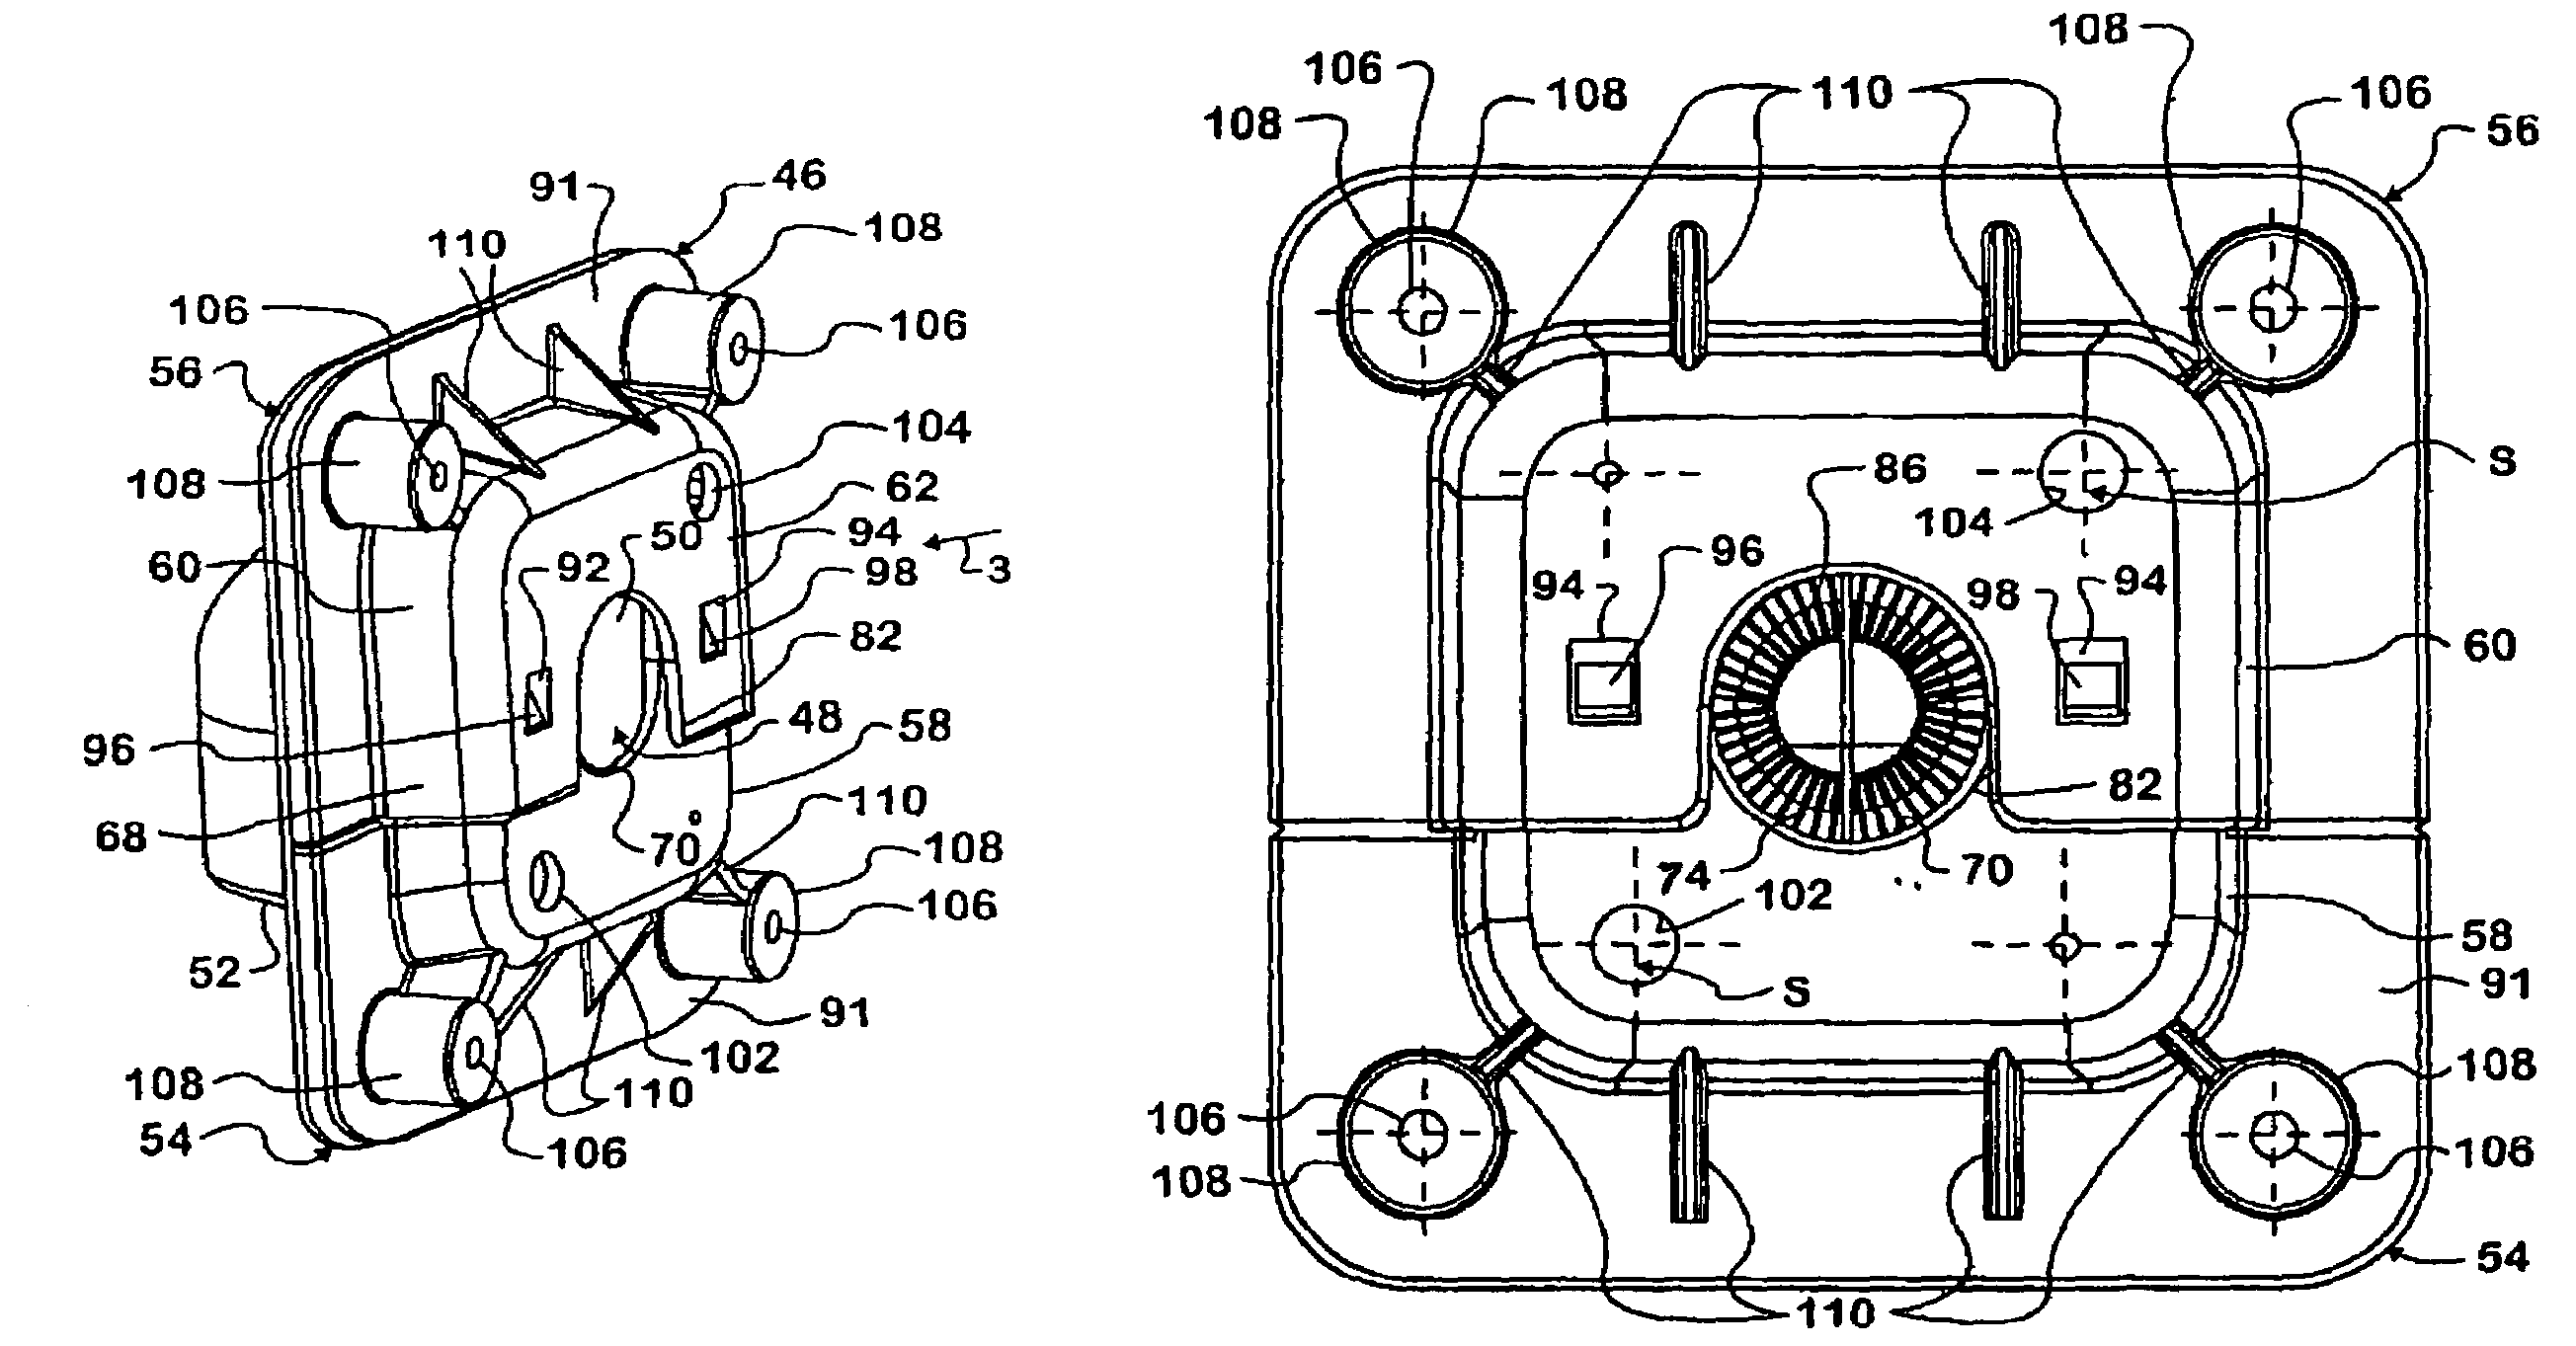 Two-piece pass-through grommet for a motor vehicle wiring harness